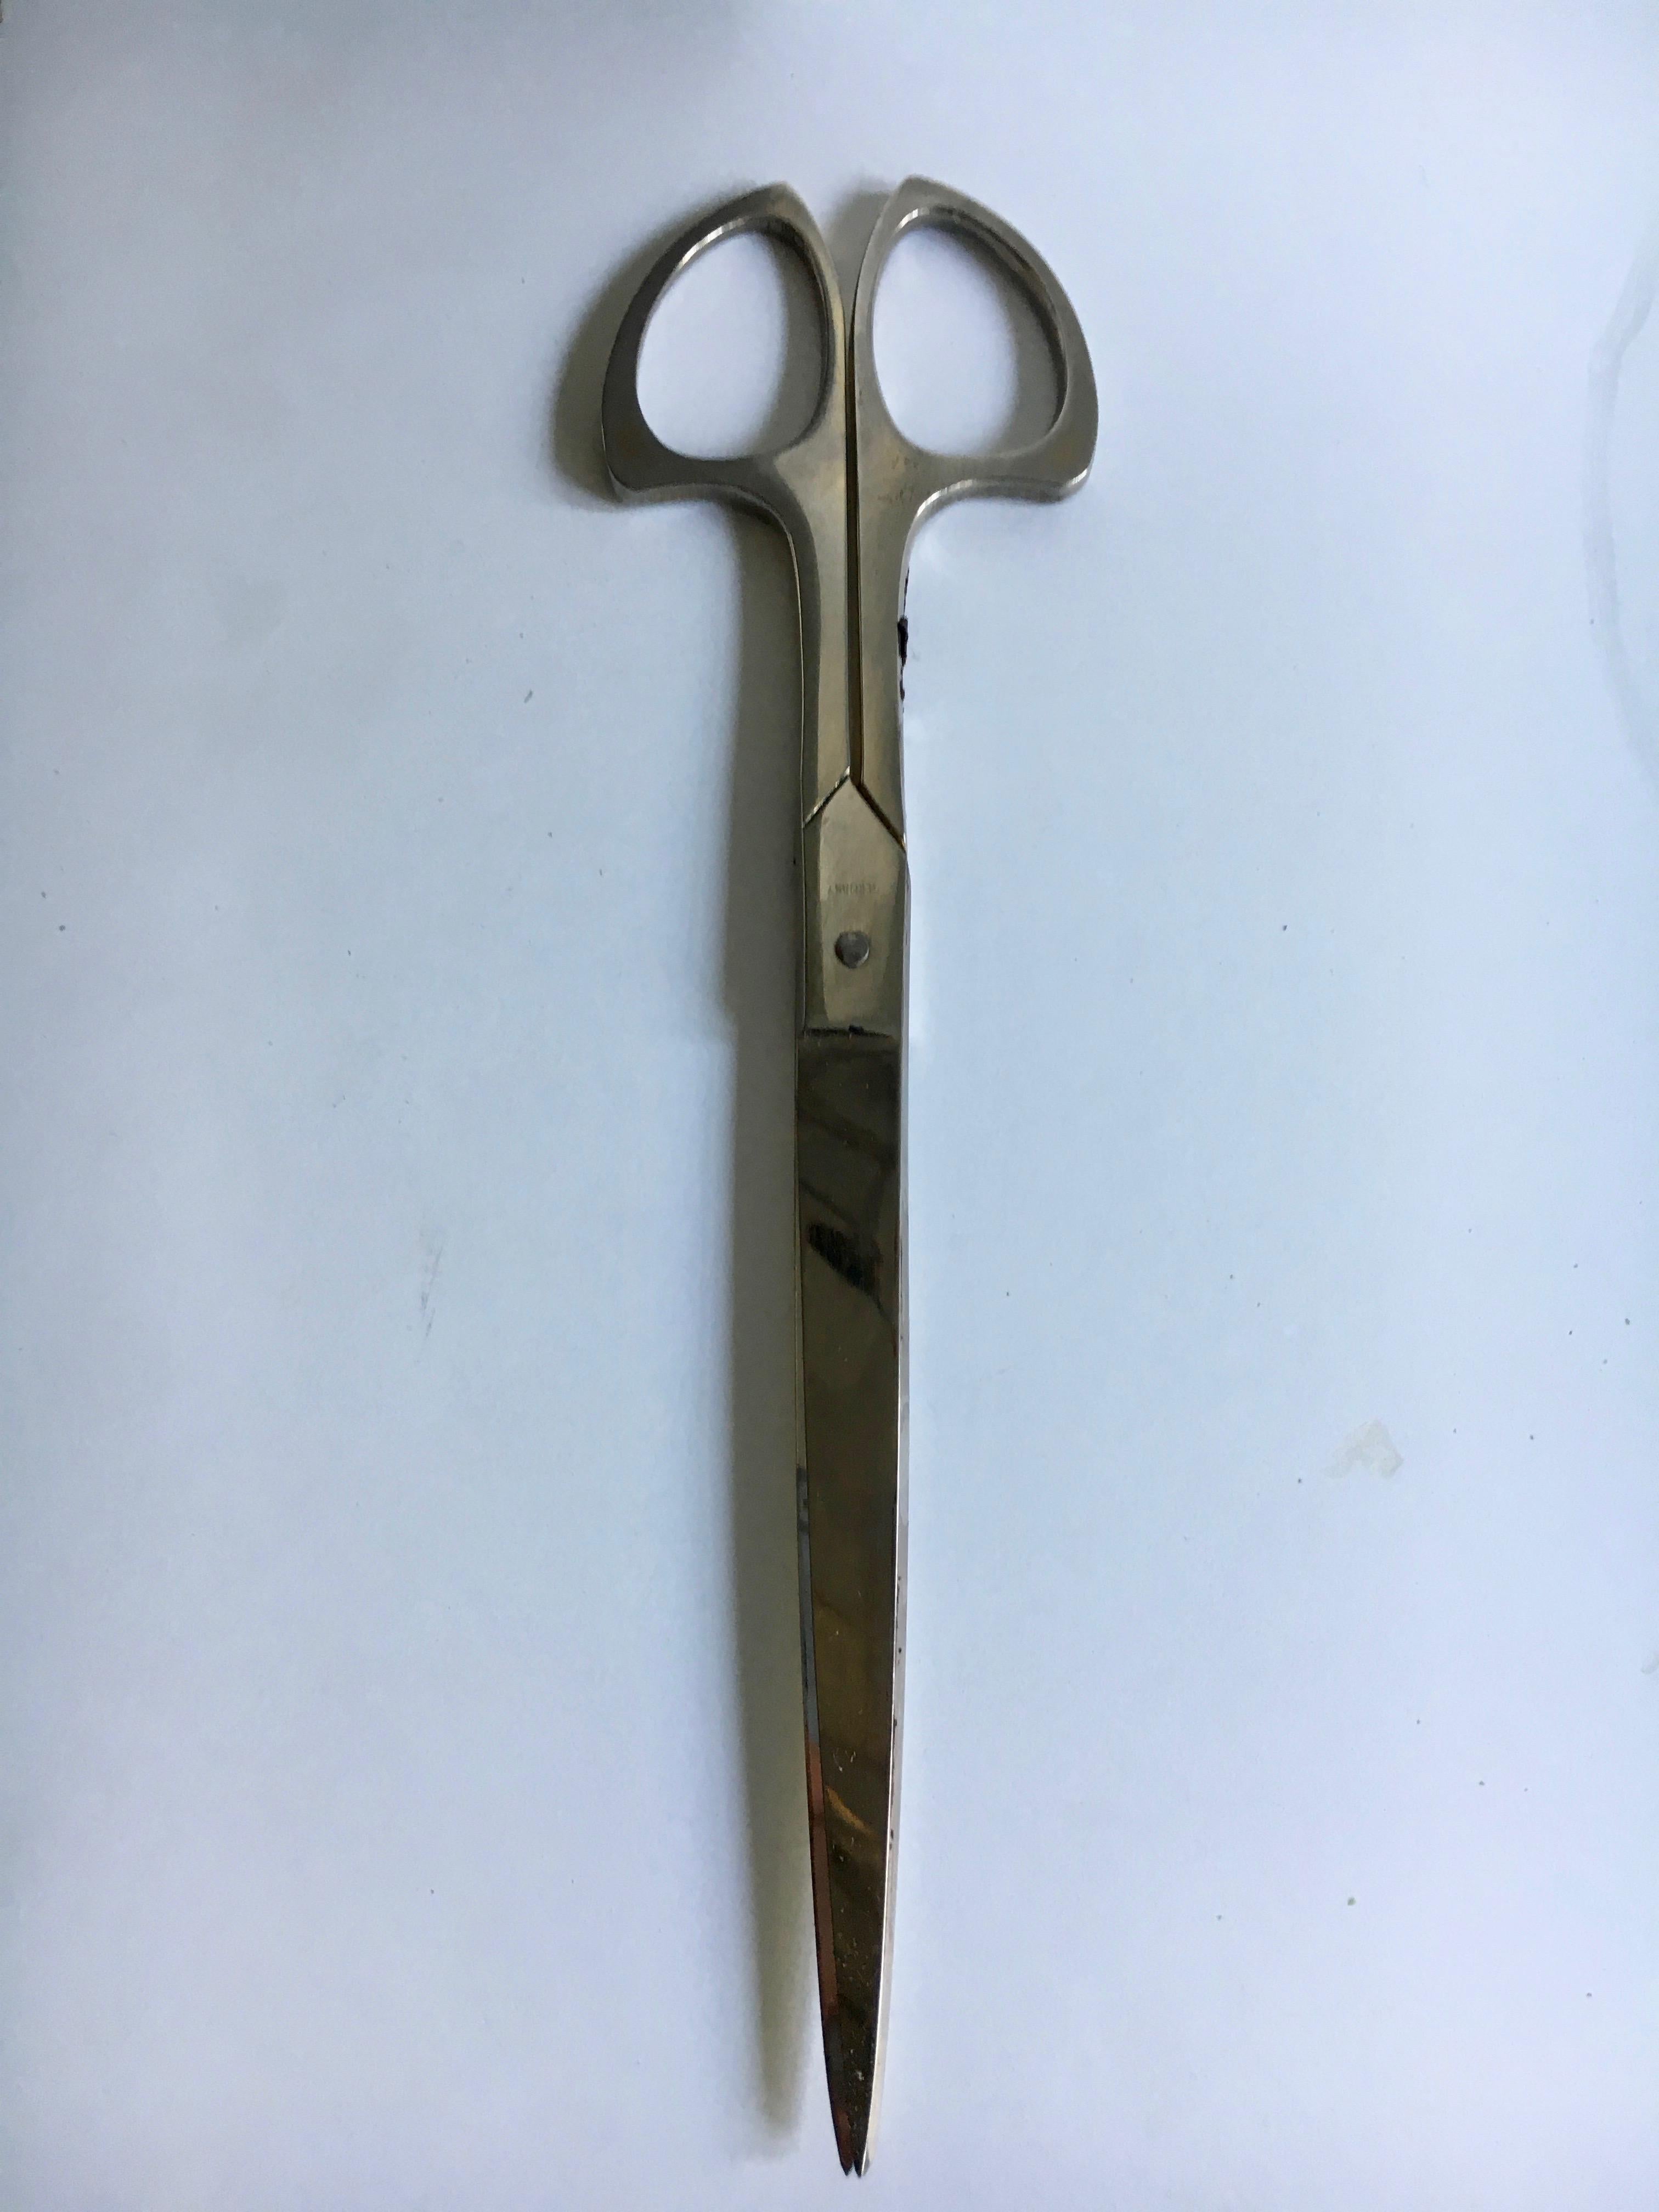 A handsome pair fine German made scissors in a leather case with Brass detail. Perfect to display on the desk in office or home. Very nicely made and presented.

Scissors handle have a faint showing of a once brass handle, however due to use have